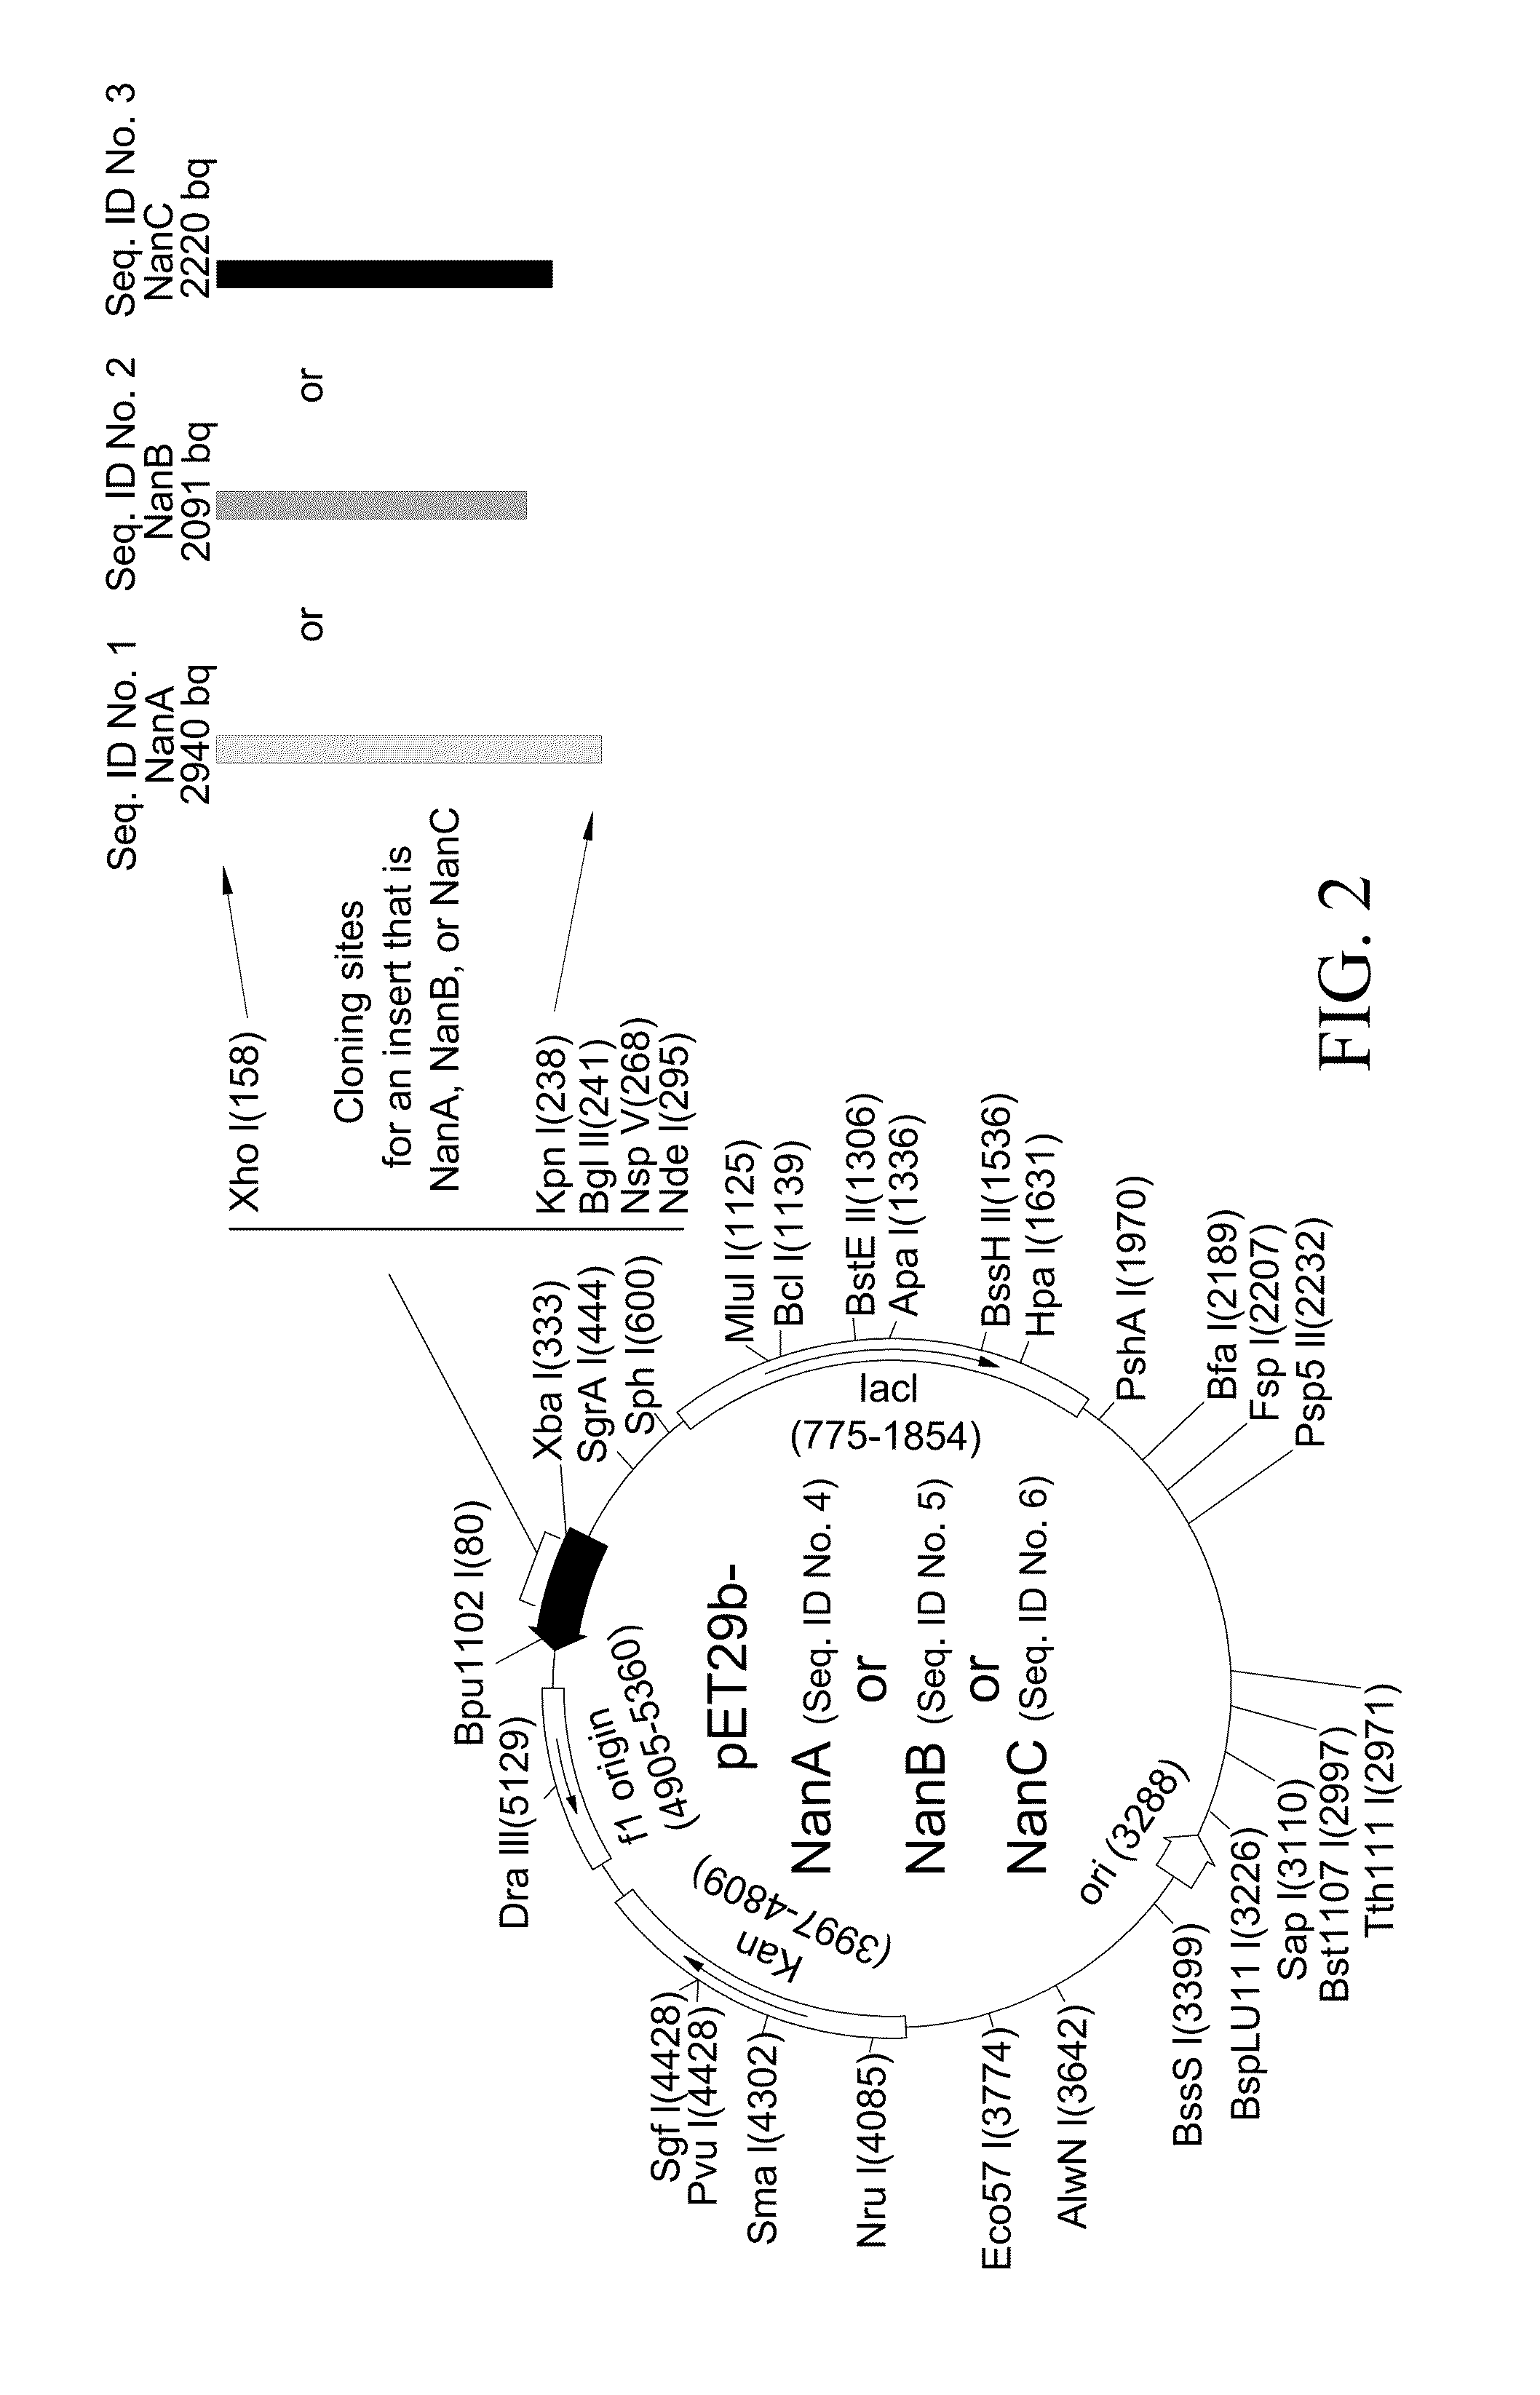 Method of diagnosing and preventing pneumococcal diseases using pneumococcal neuraminidases